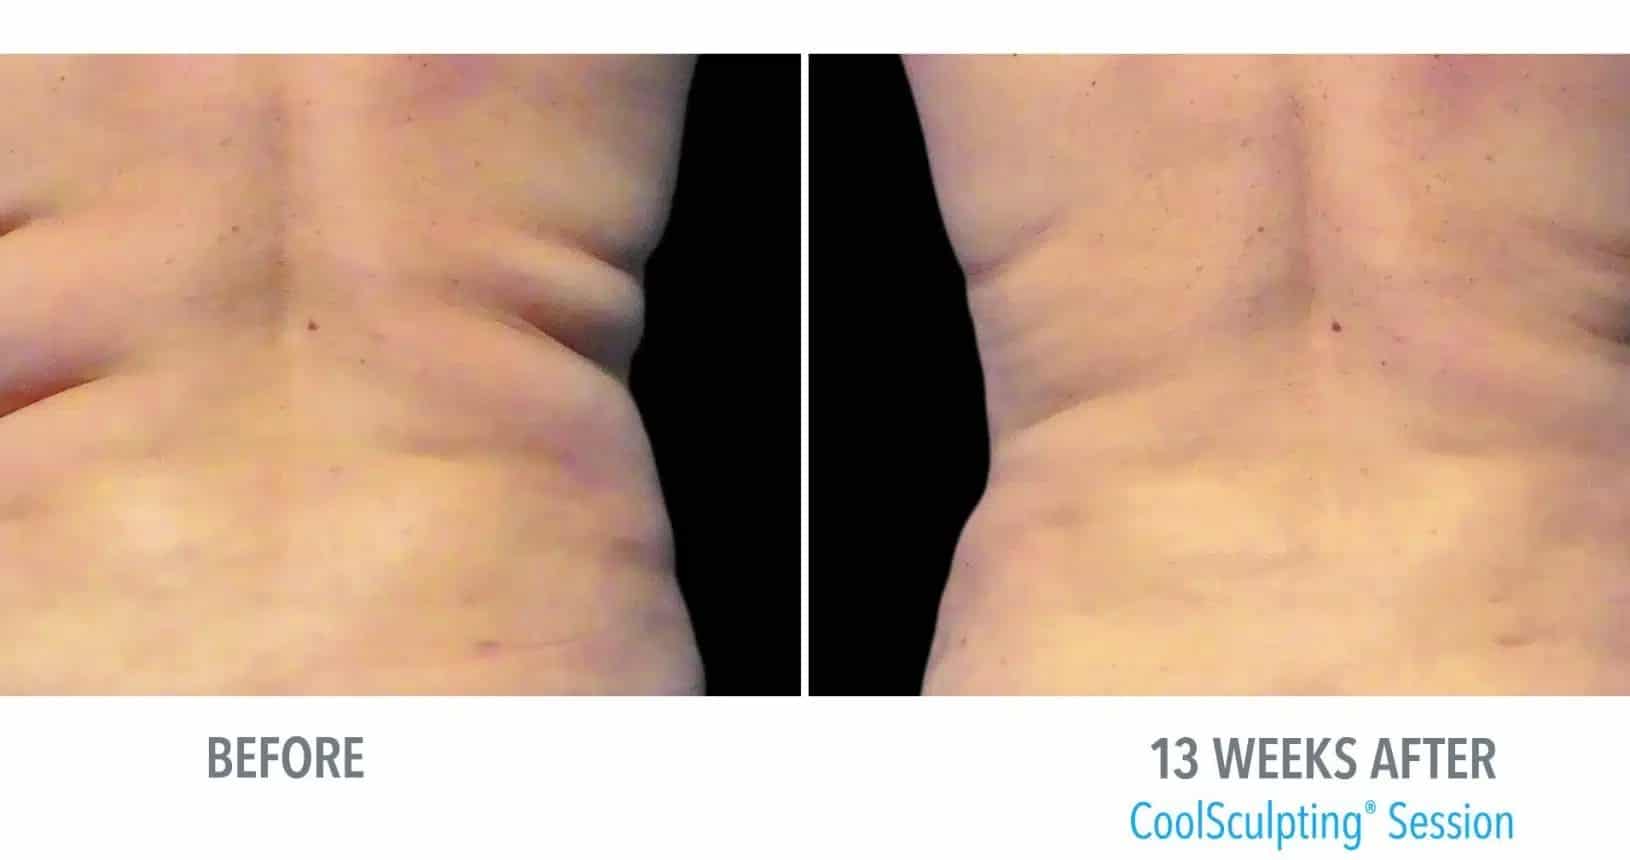 patient's back before and after coolsculpting, less back fat after procedure